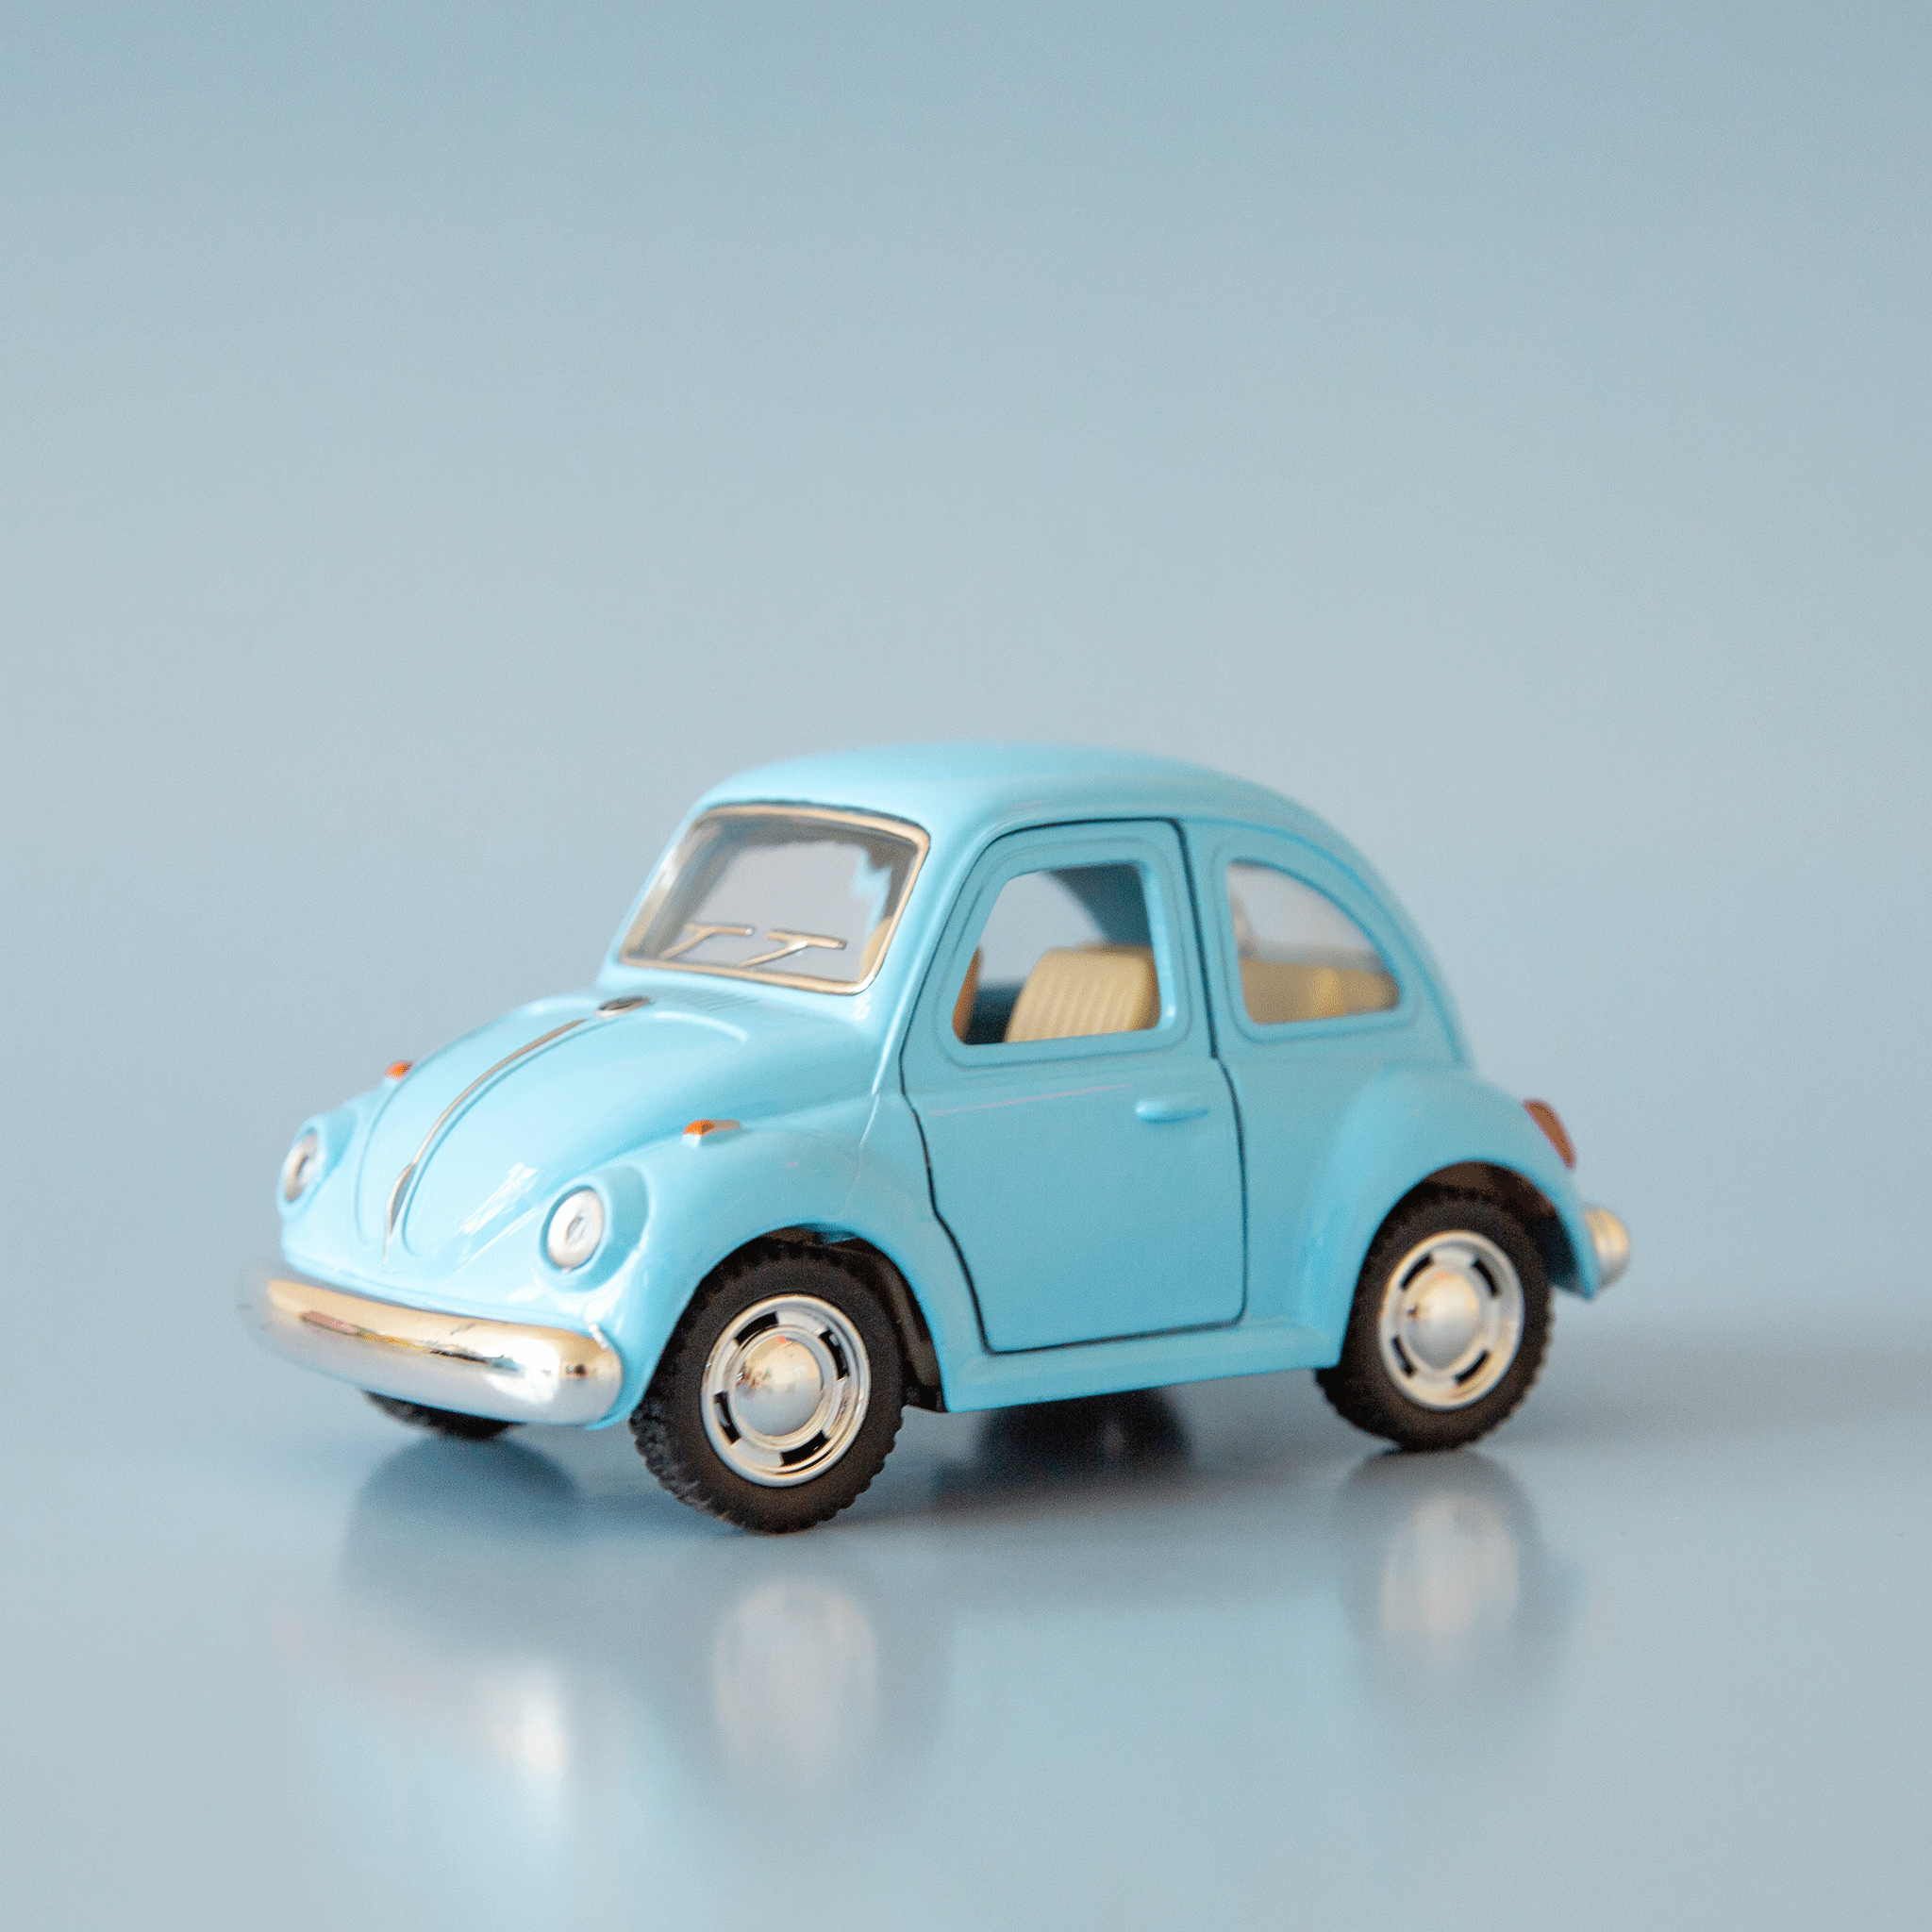 On a blue background is a blue vw bug toy. 